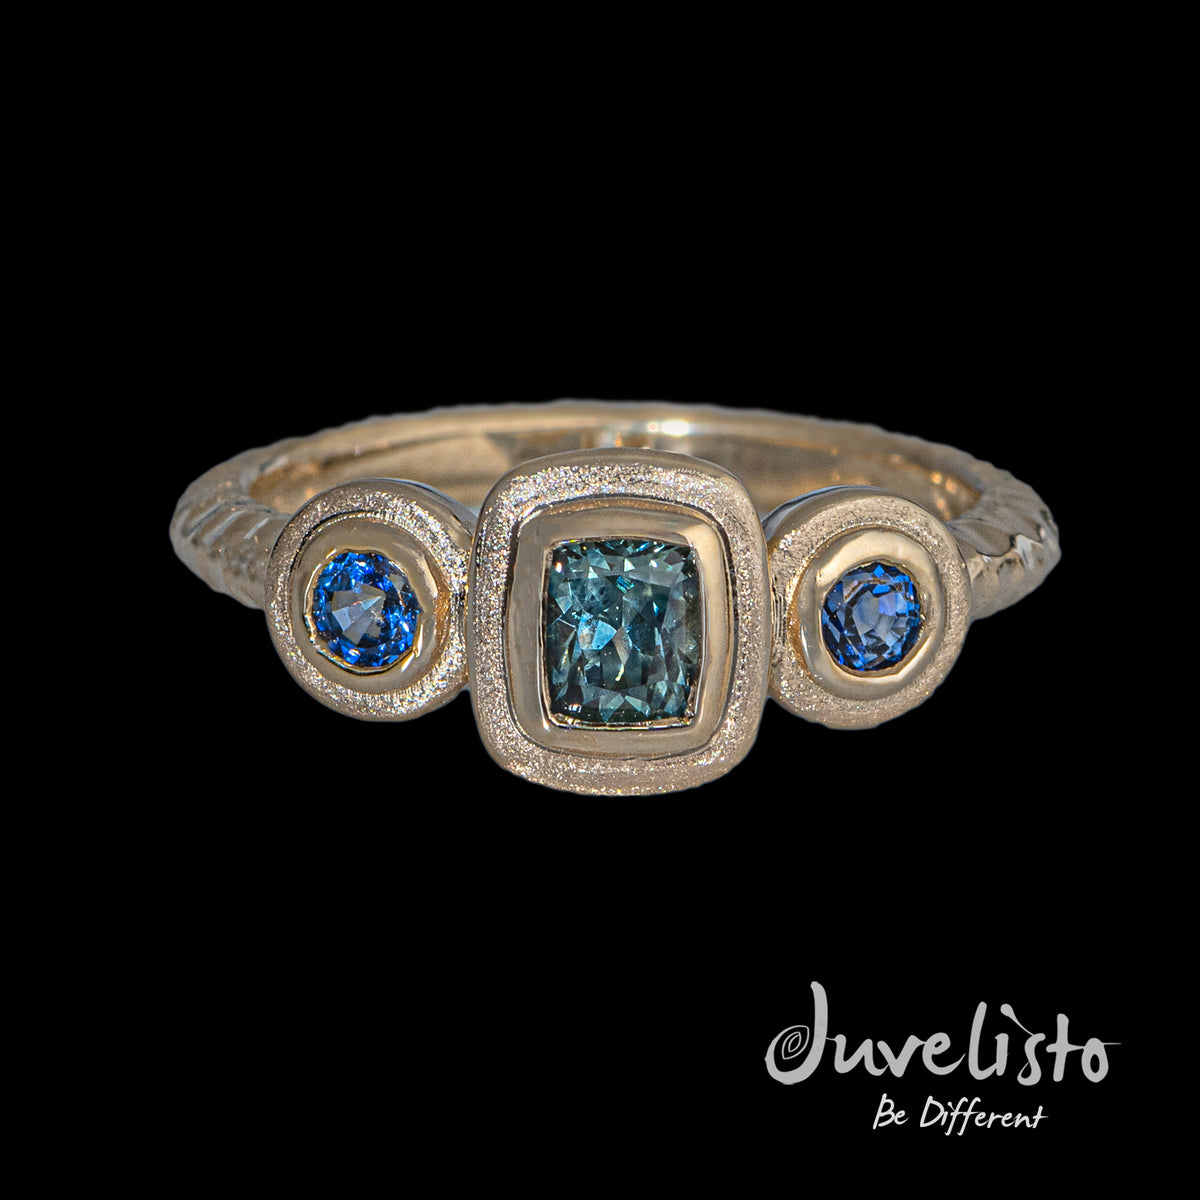 Juvelisto Design  14K YG Gold Hammer Texture Ring with Sapphires